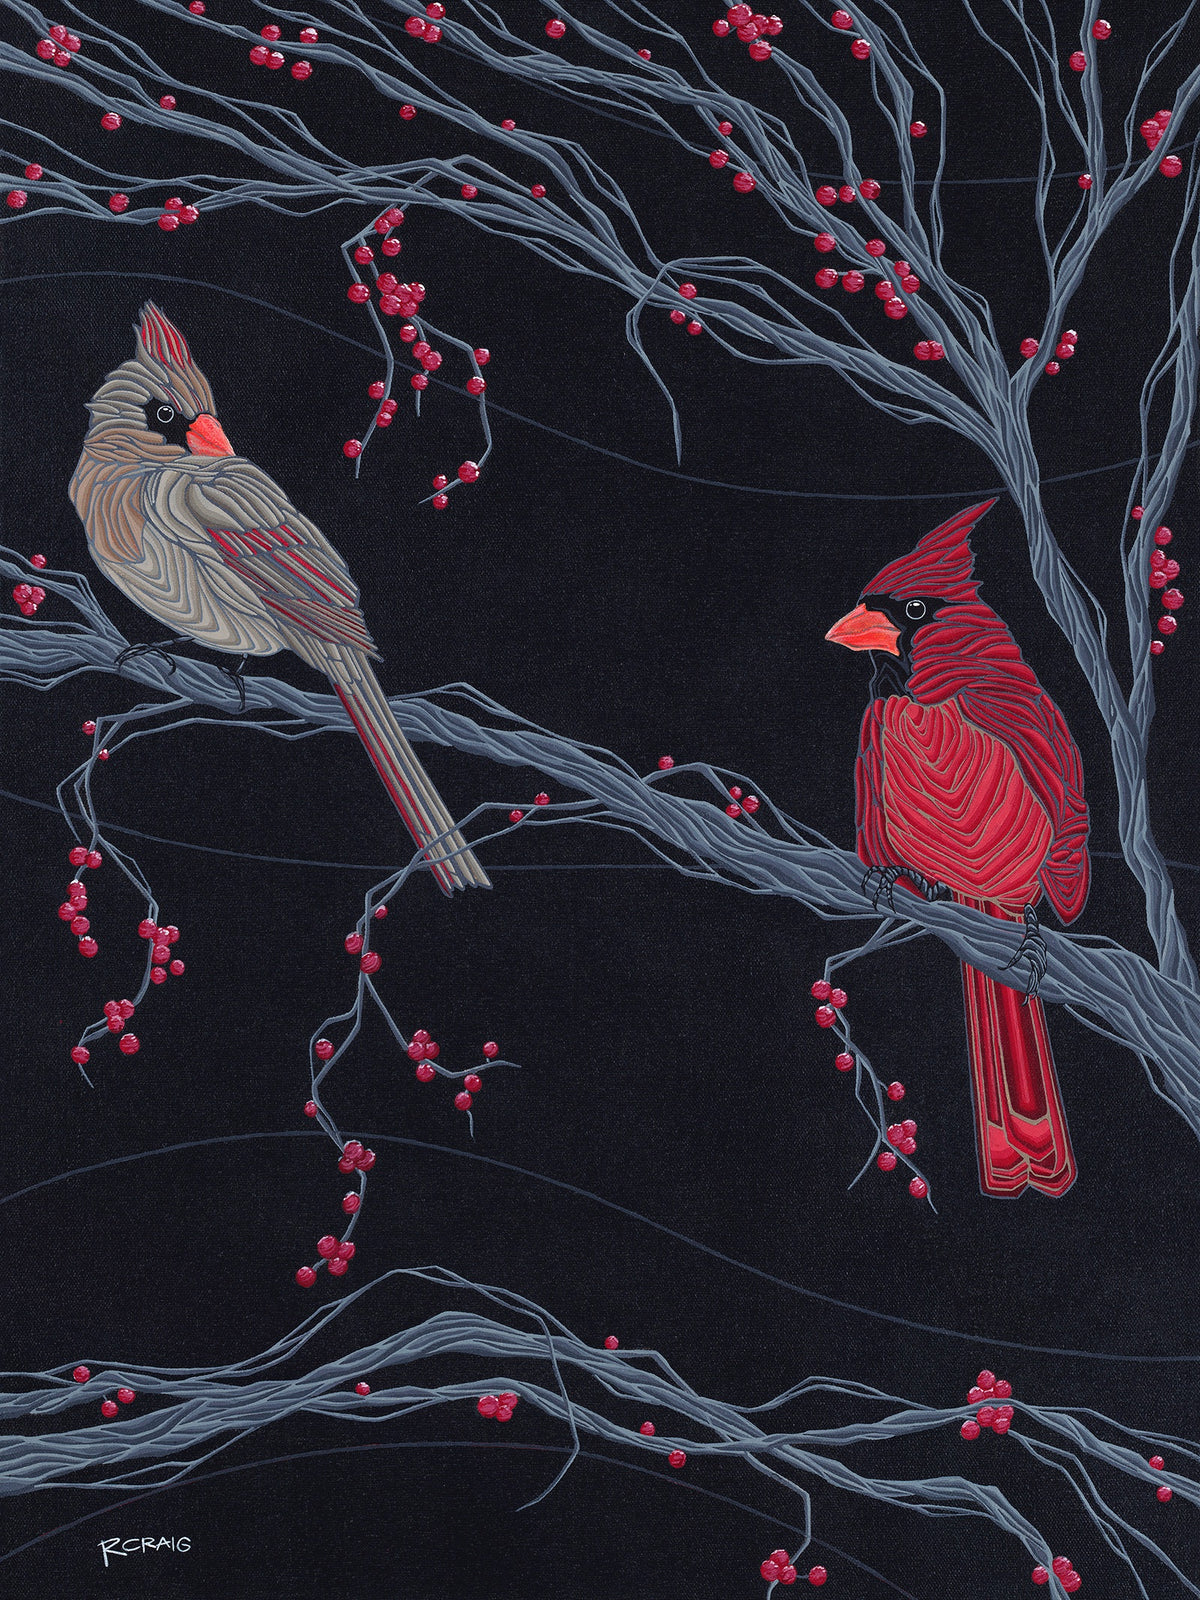 Cardinals and the Winter Berries